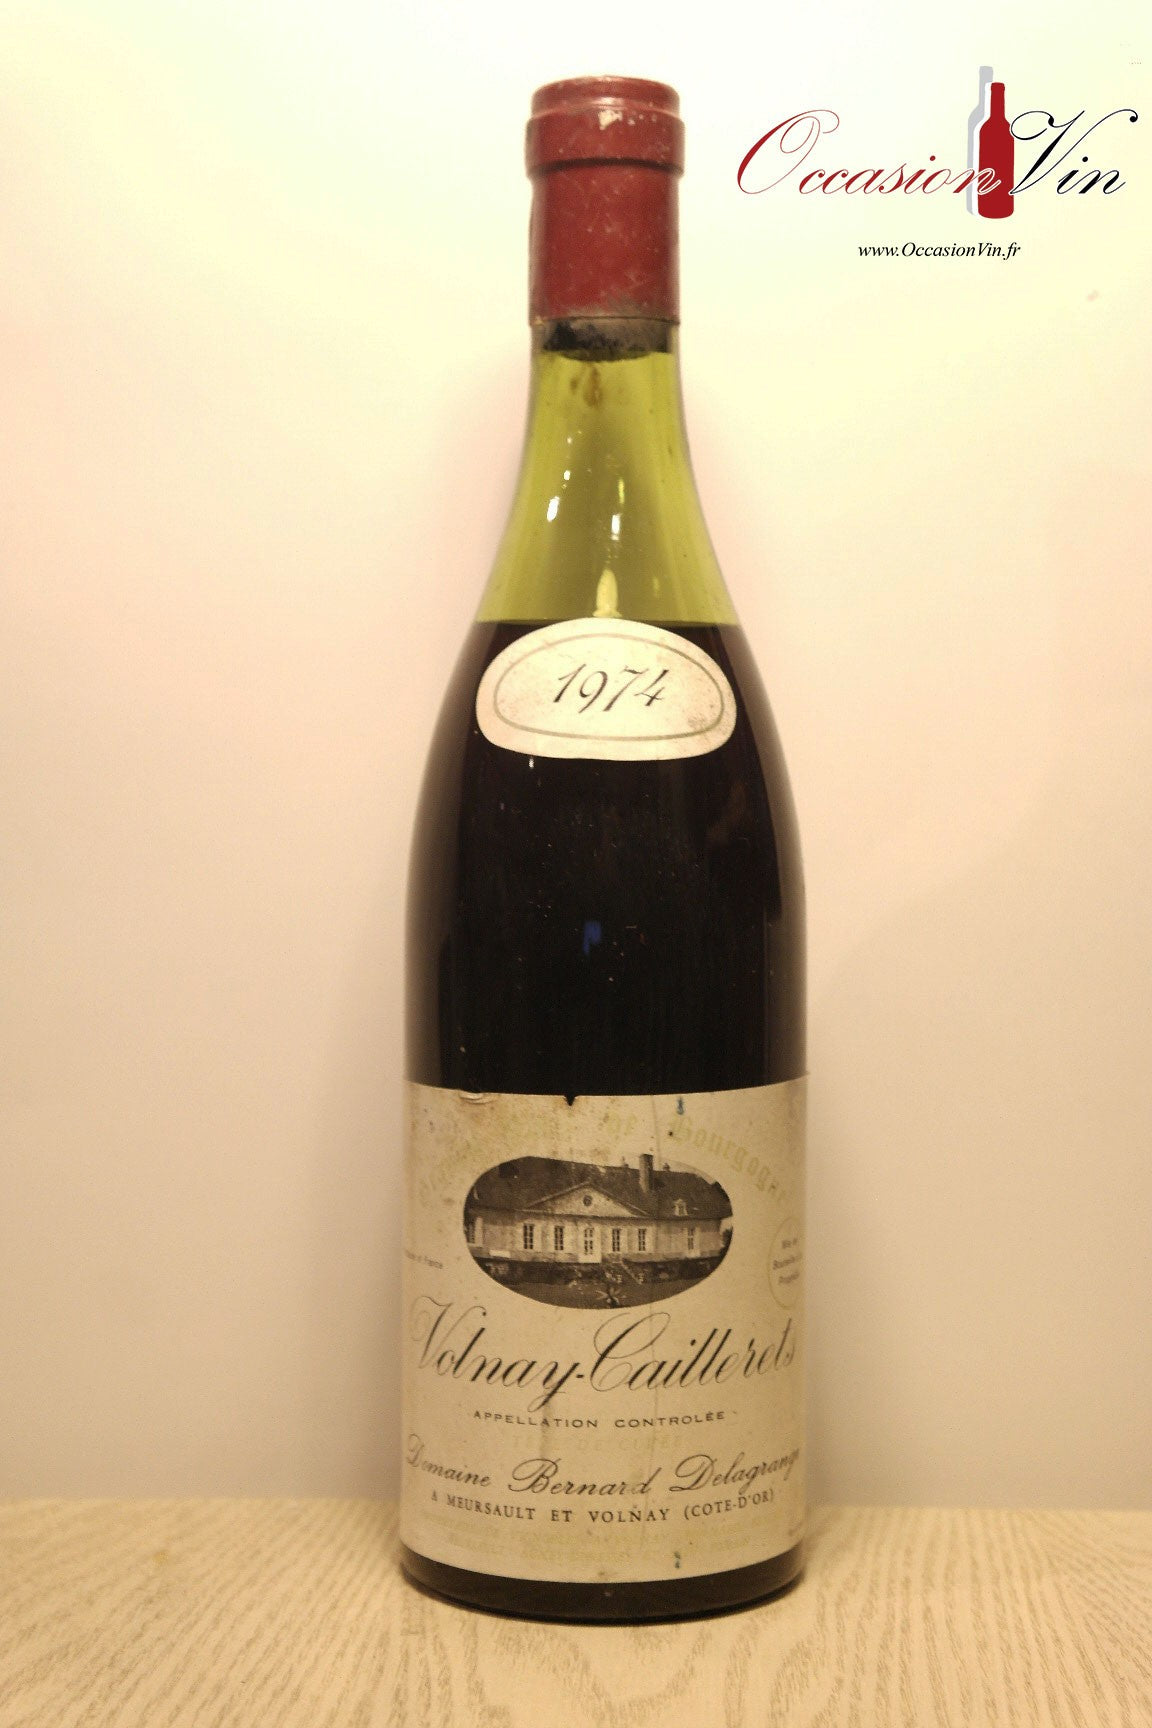 Volnay-Caillerets Vin 1974